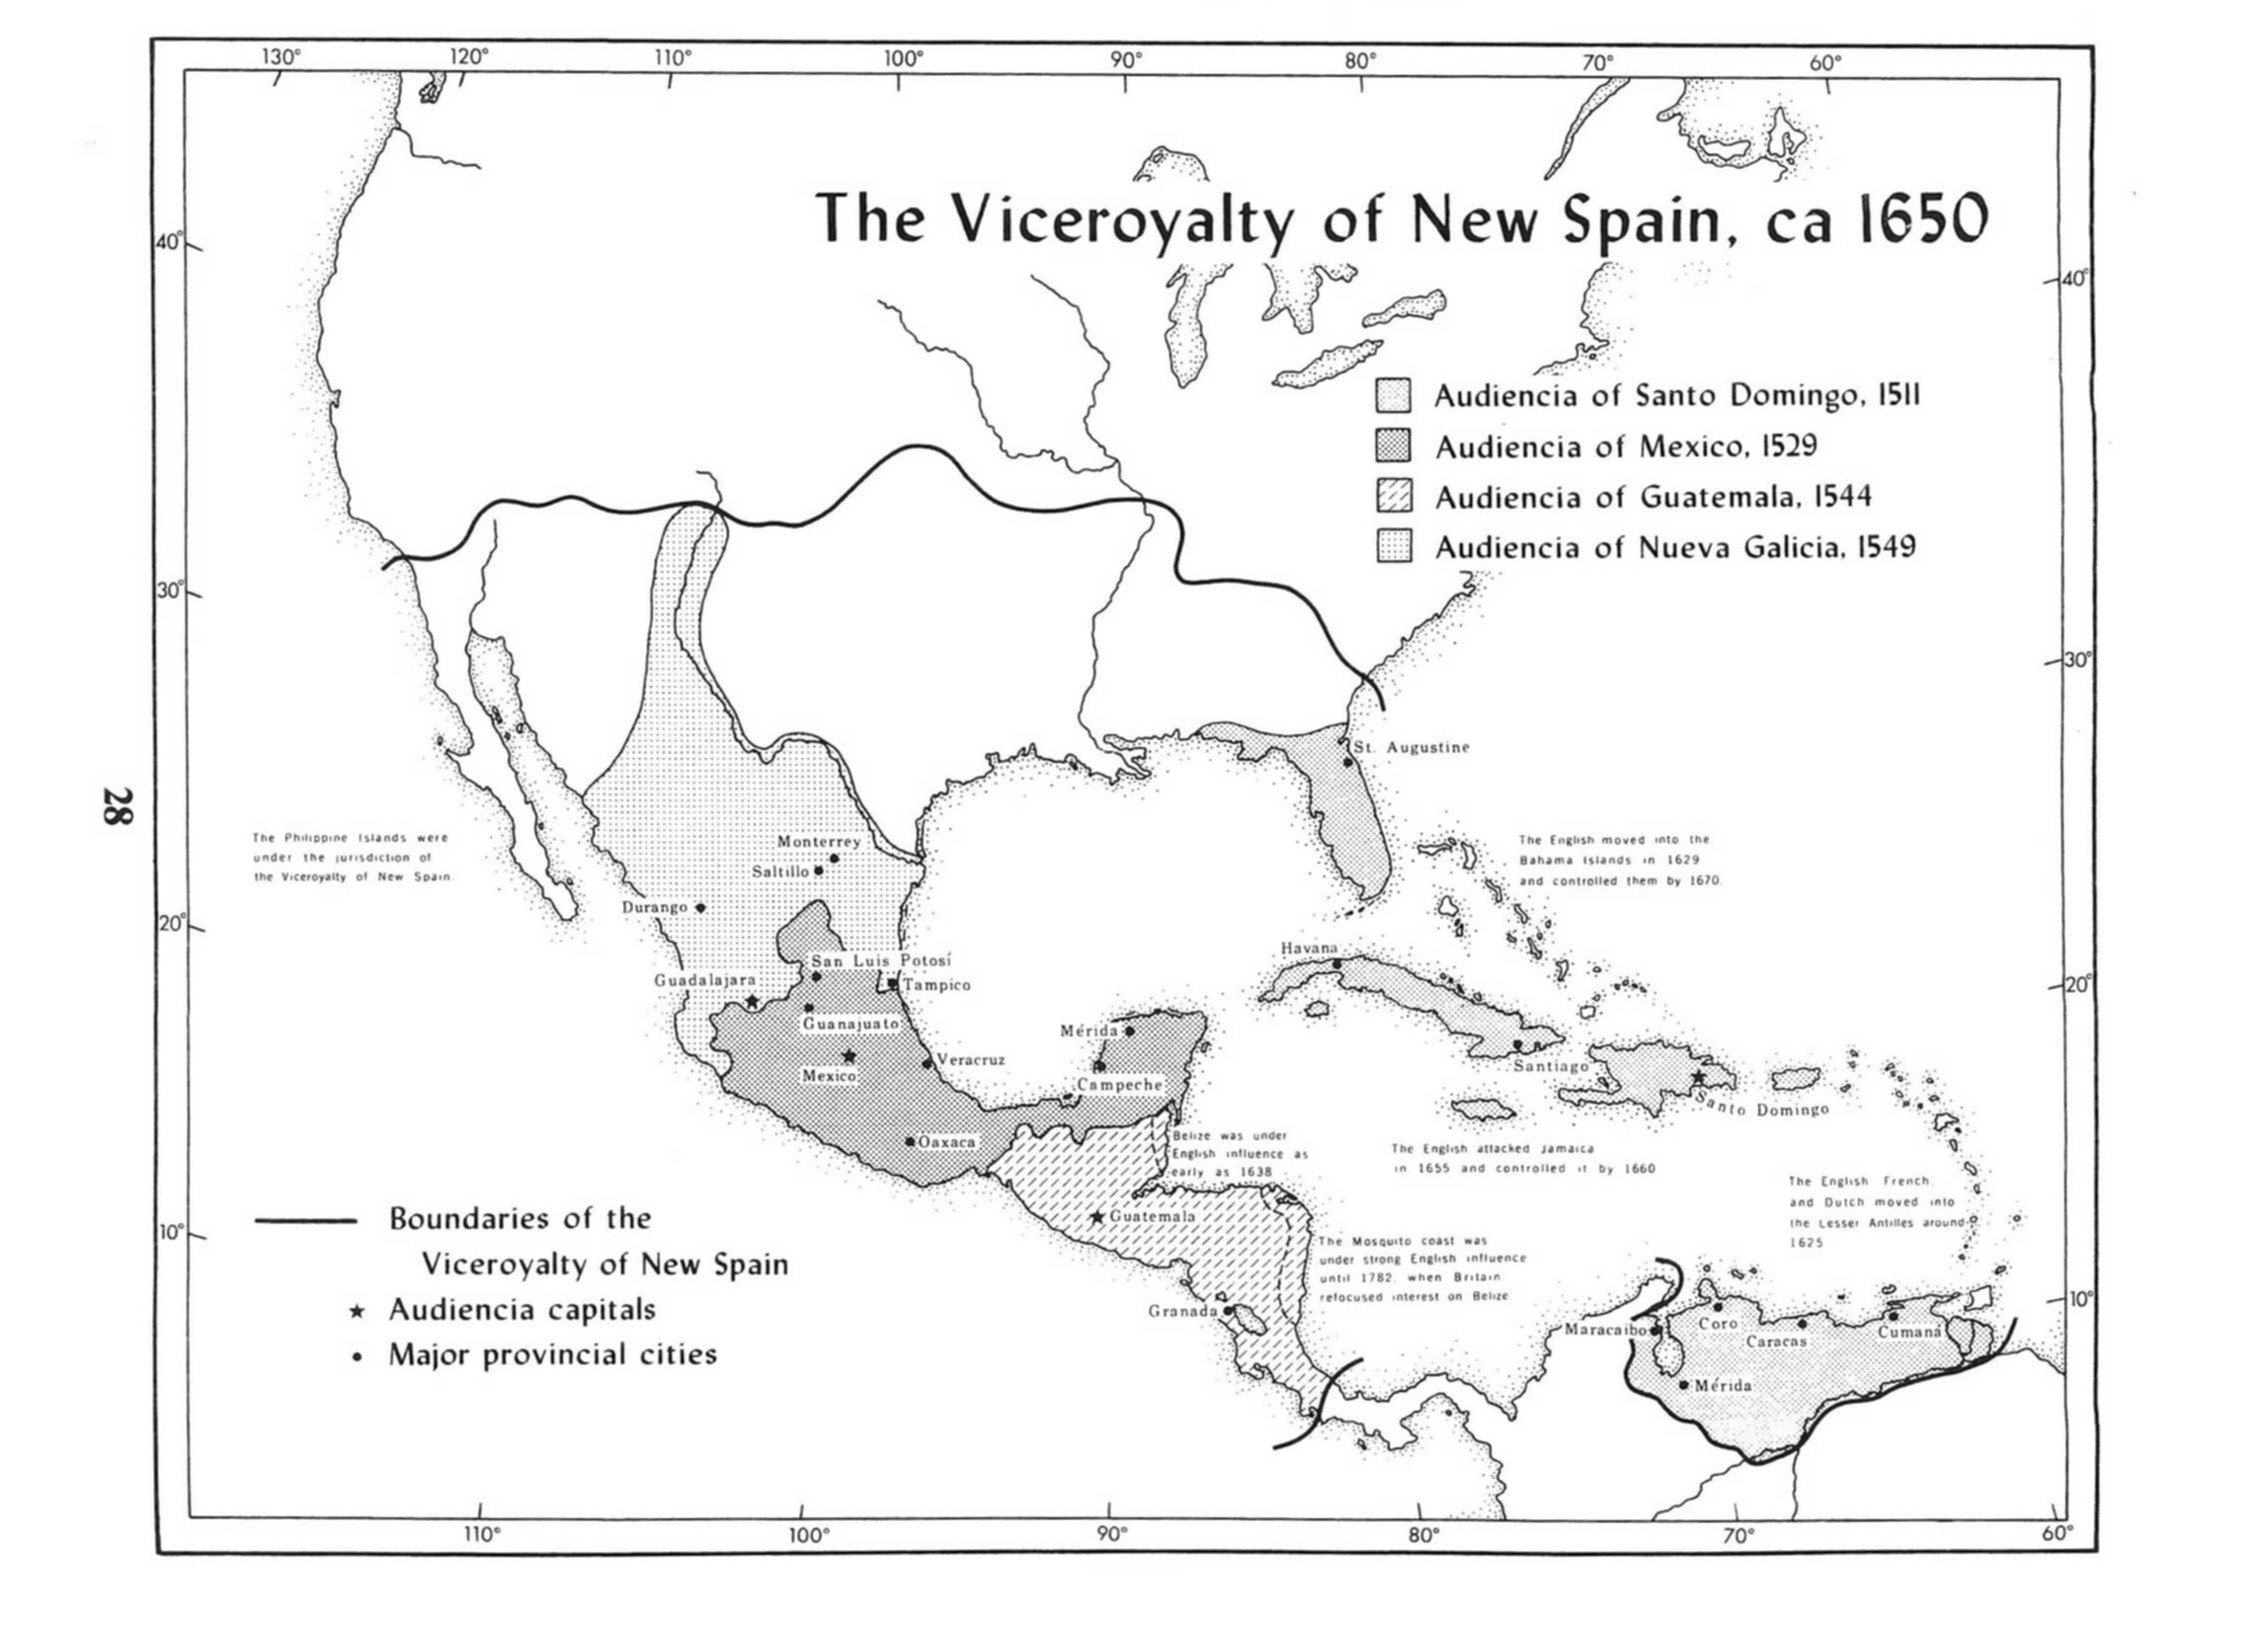 Viceroyalty of New Spain 1650